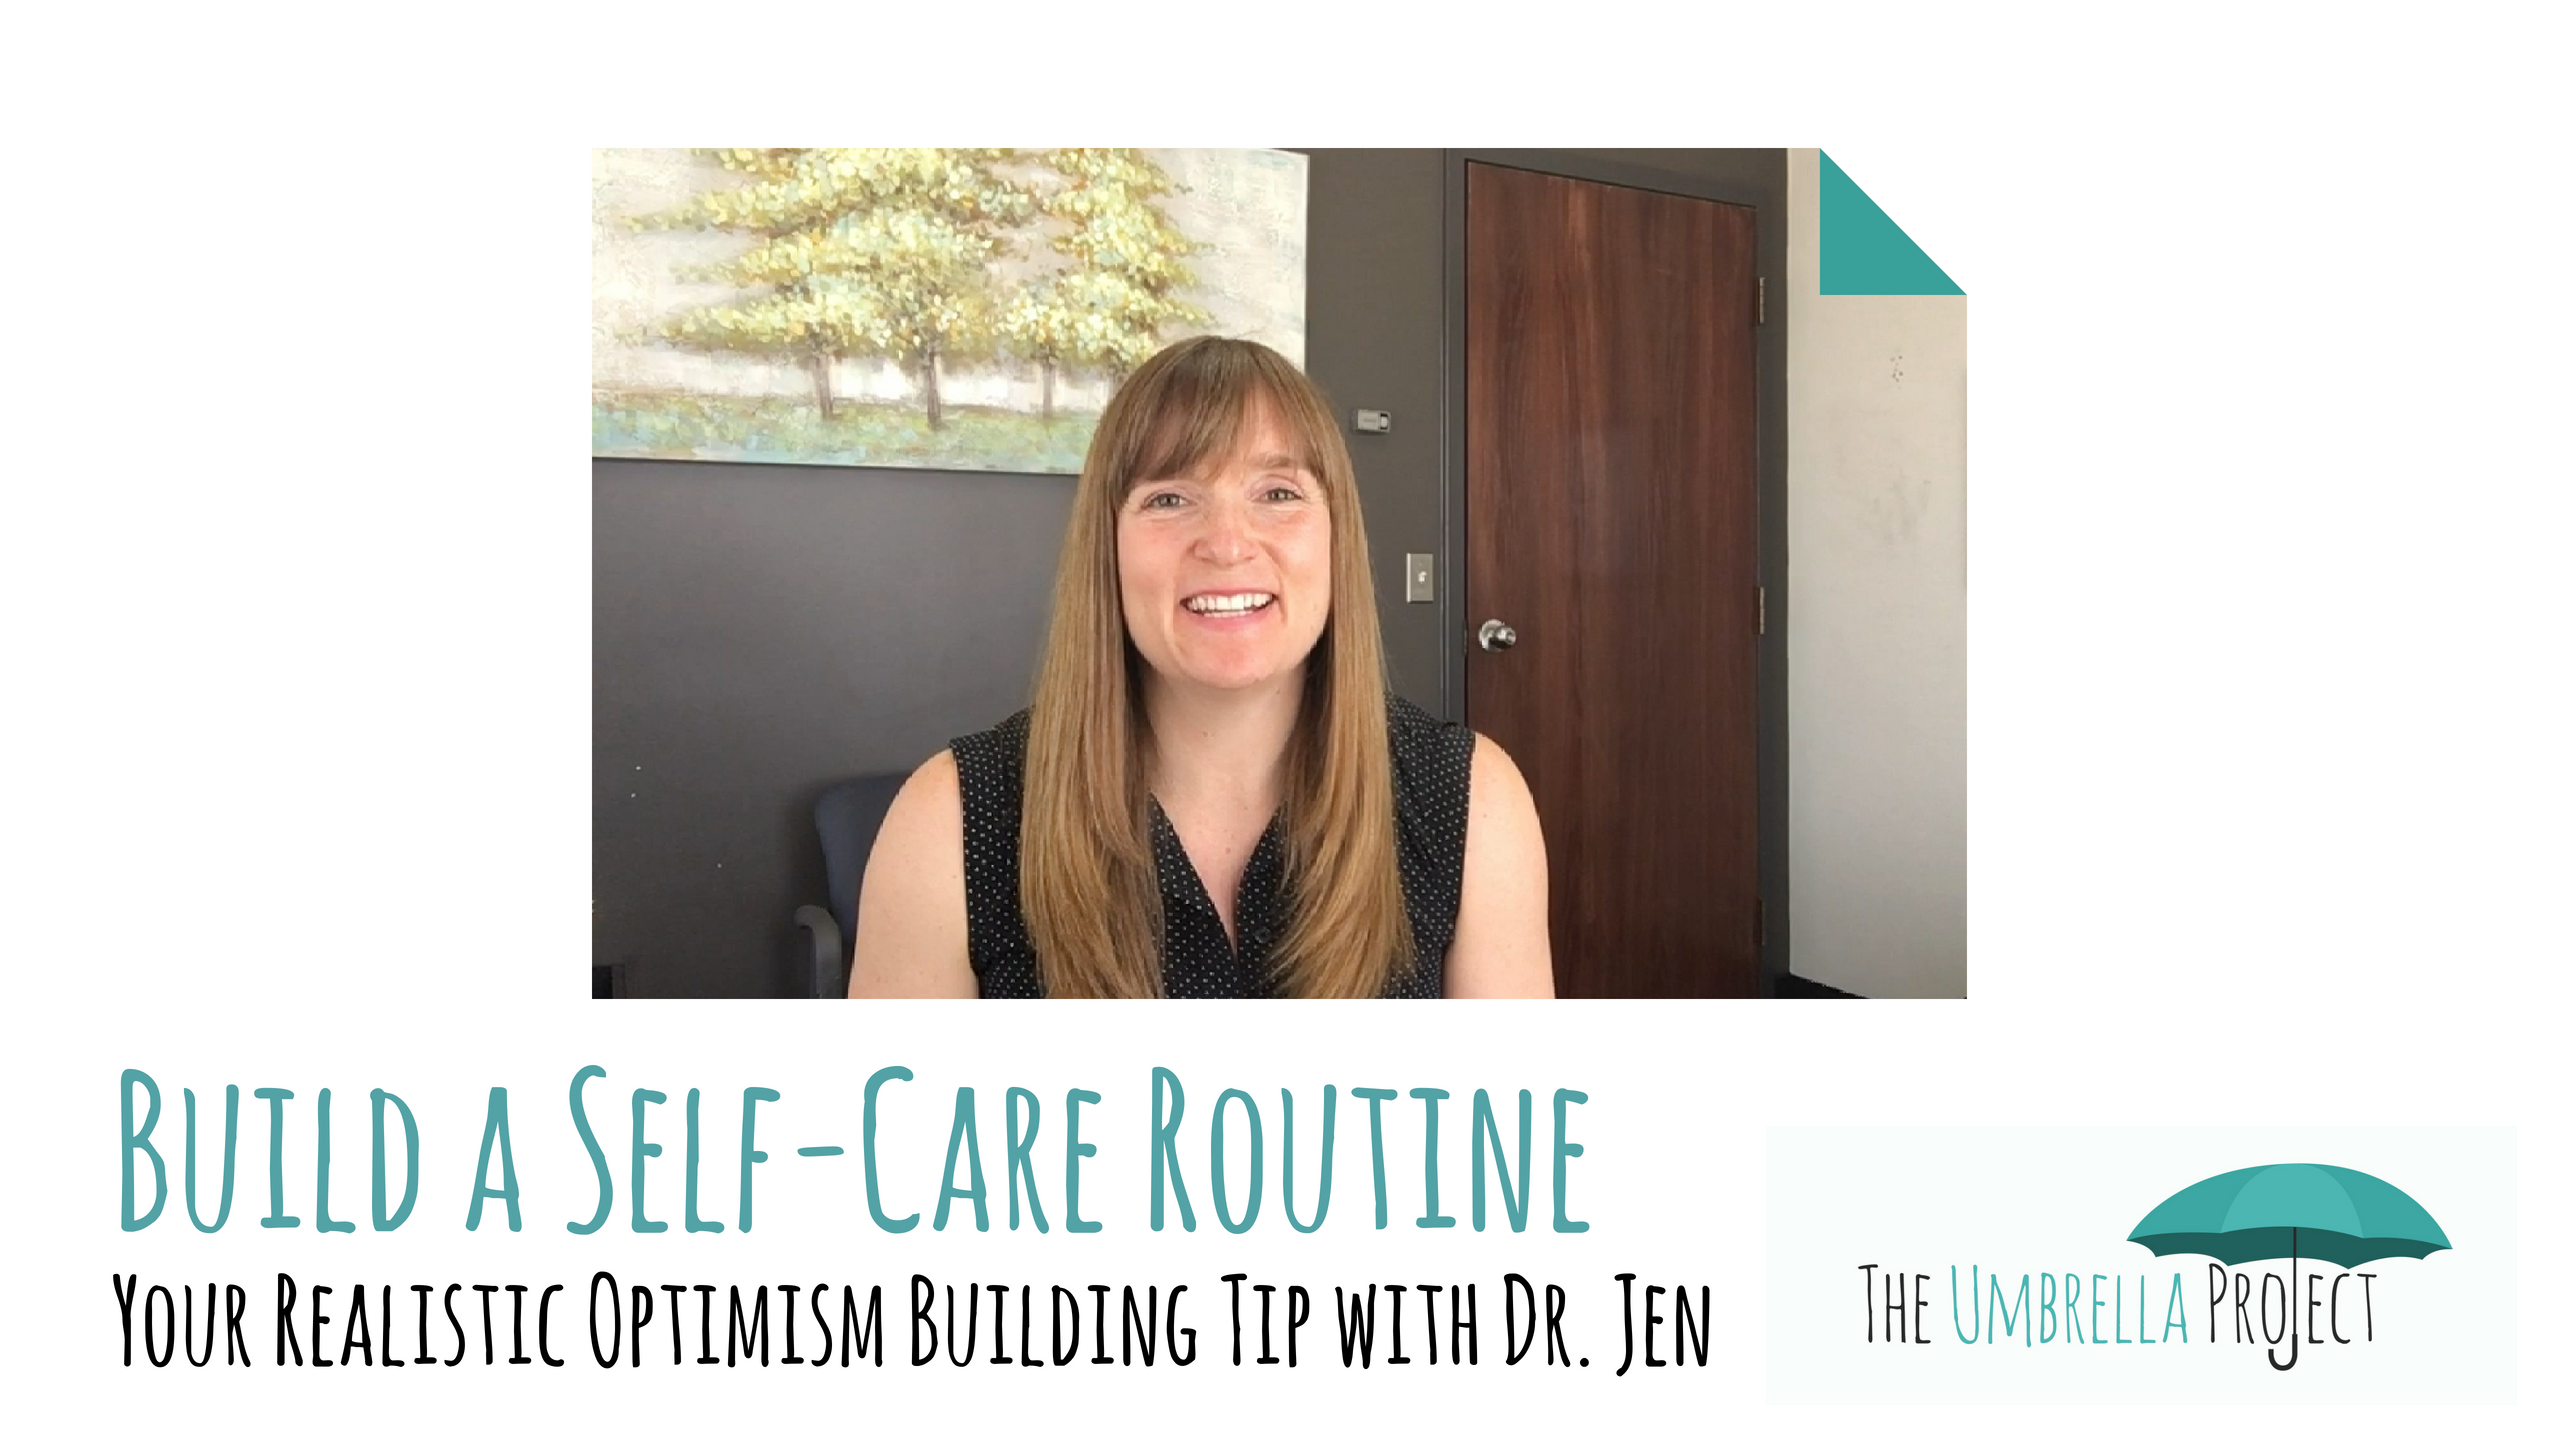 Build a Self-Care Routine: Today’s Realistic Optimism Building Tip with Dr. Jen